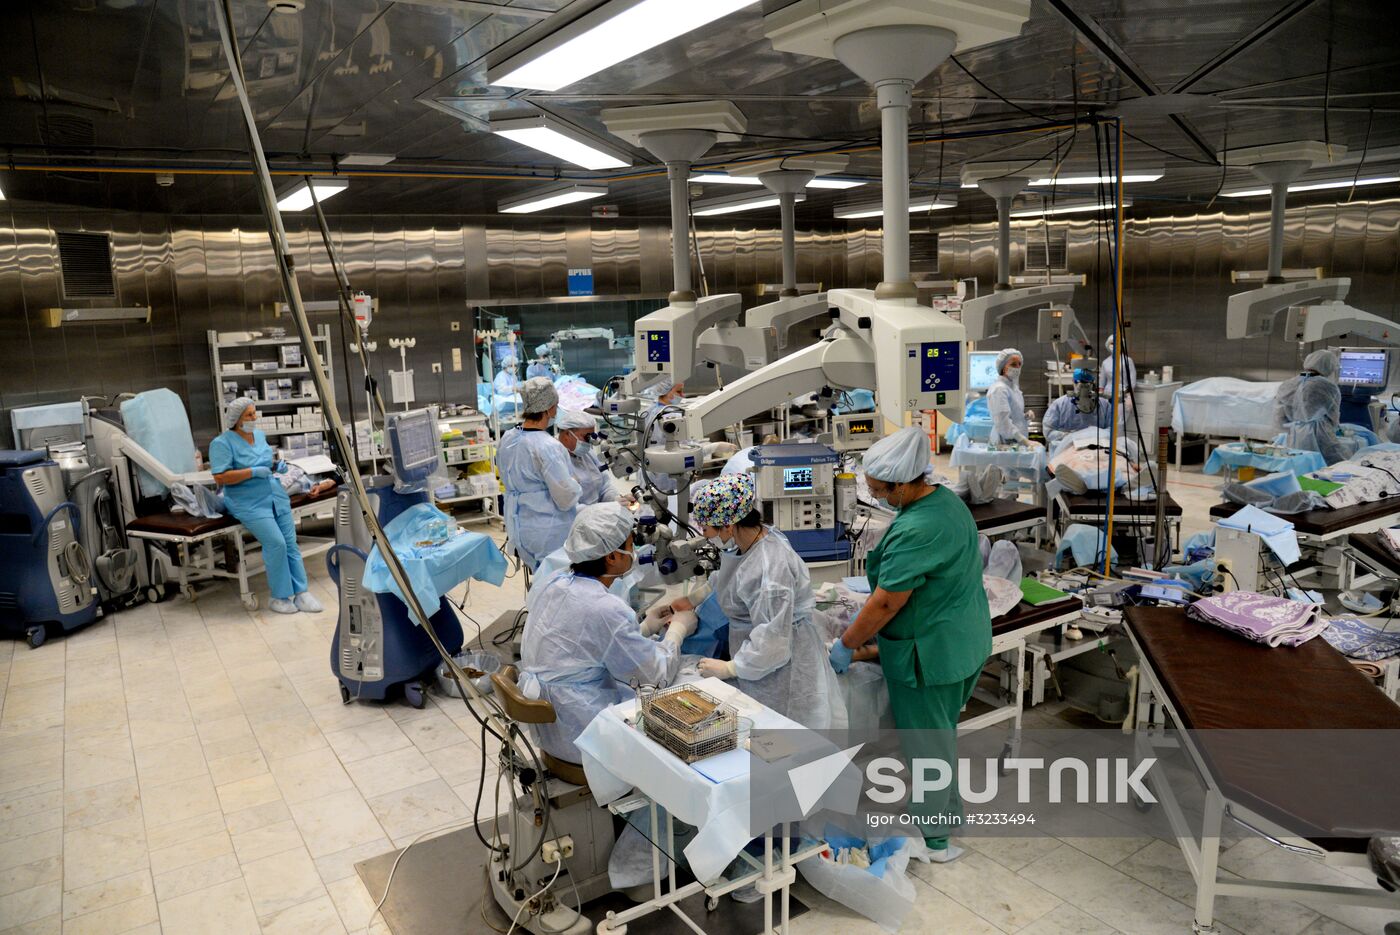 Eye Microsurgery Federal State Institution in Khabarovsk